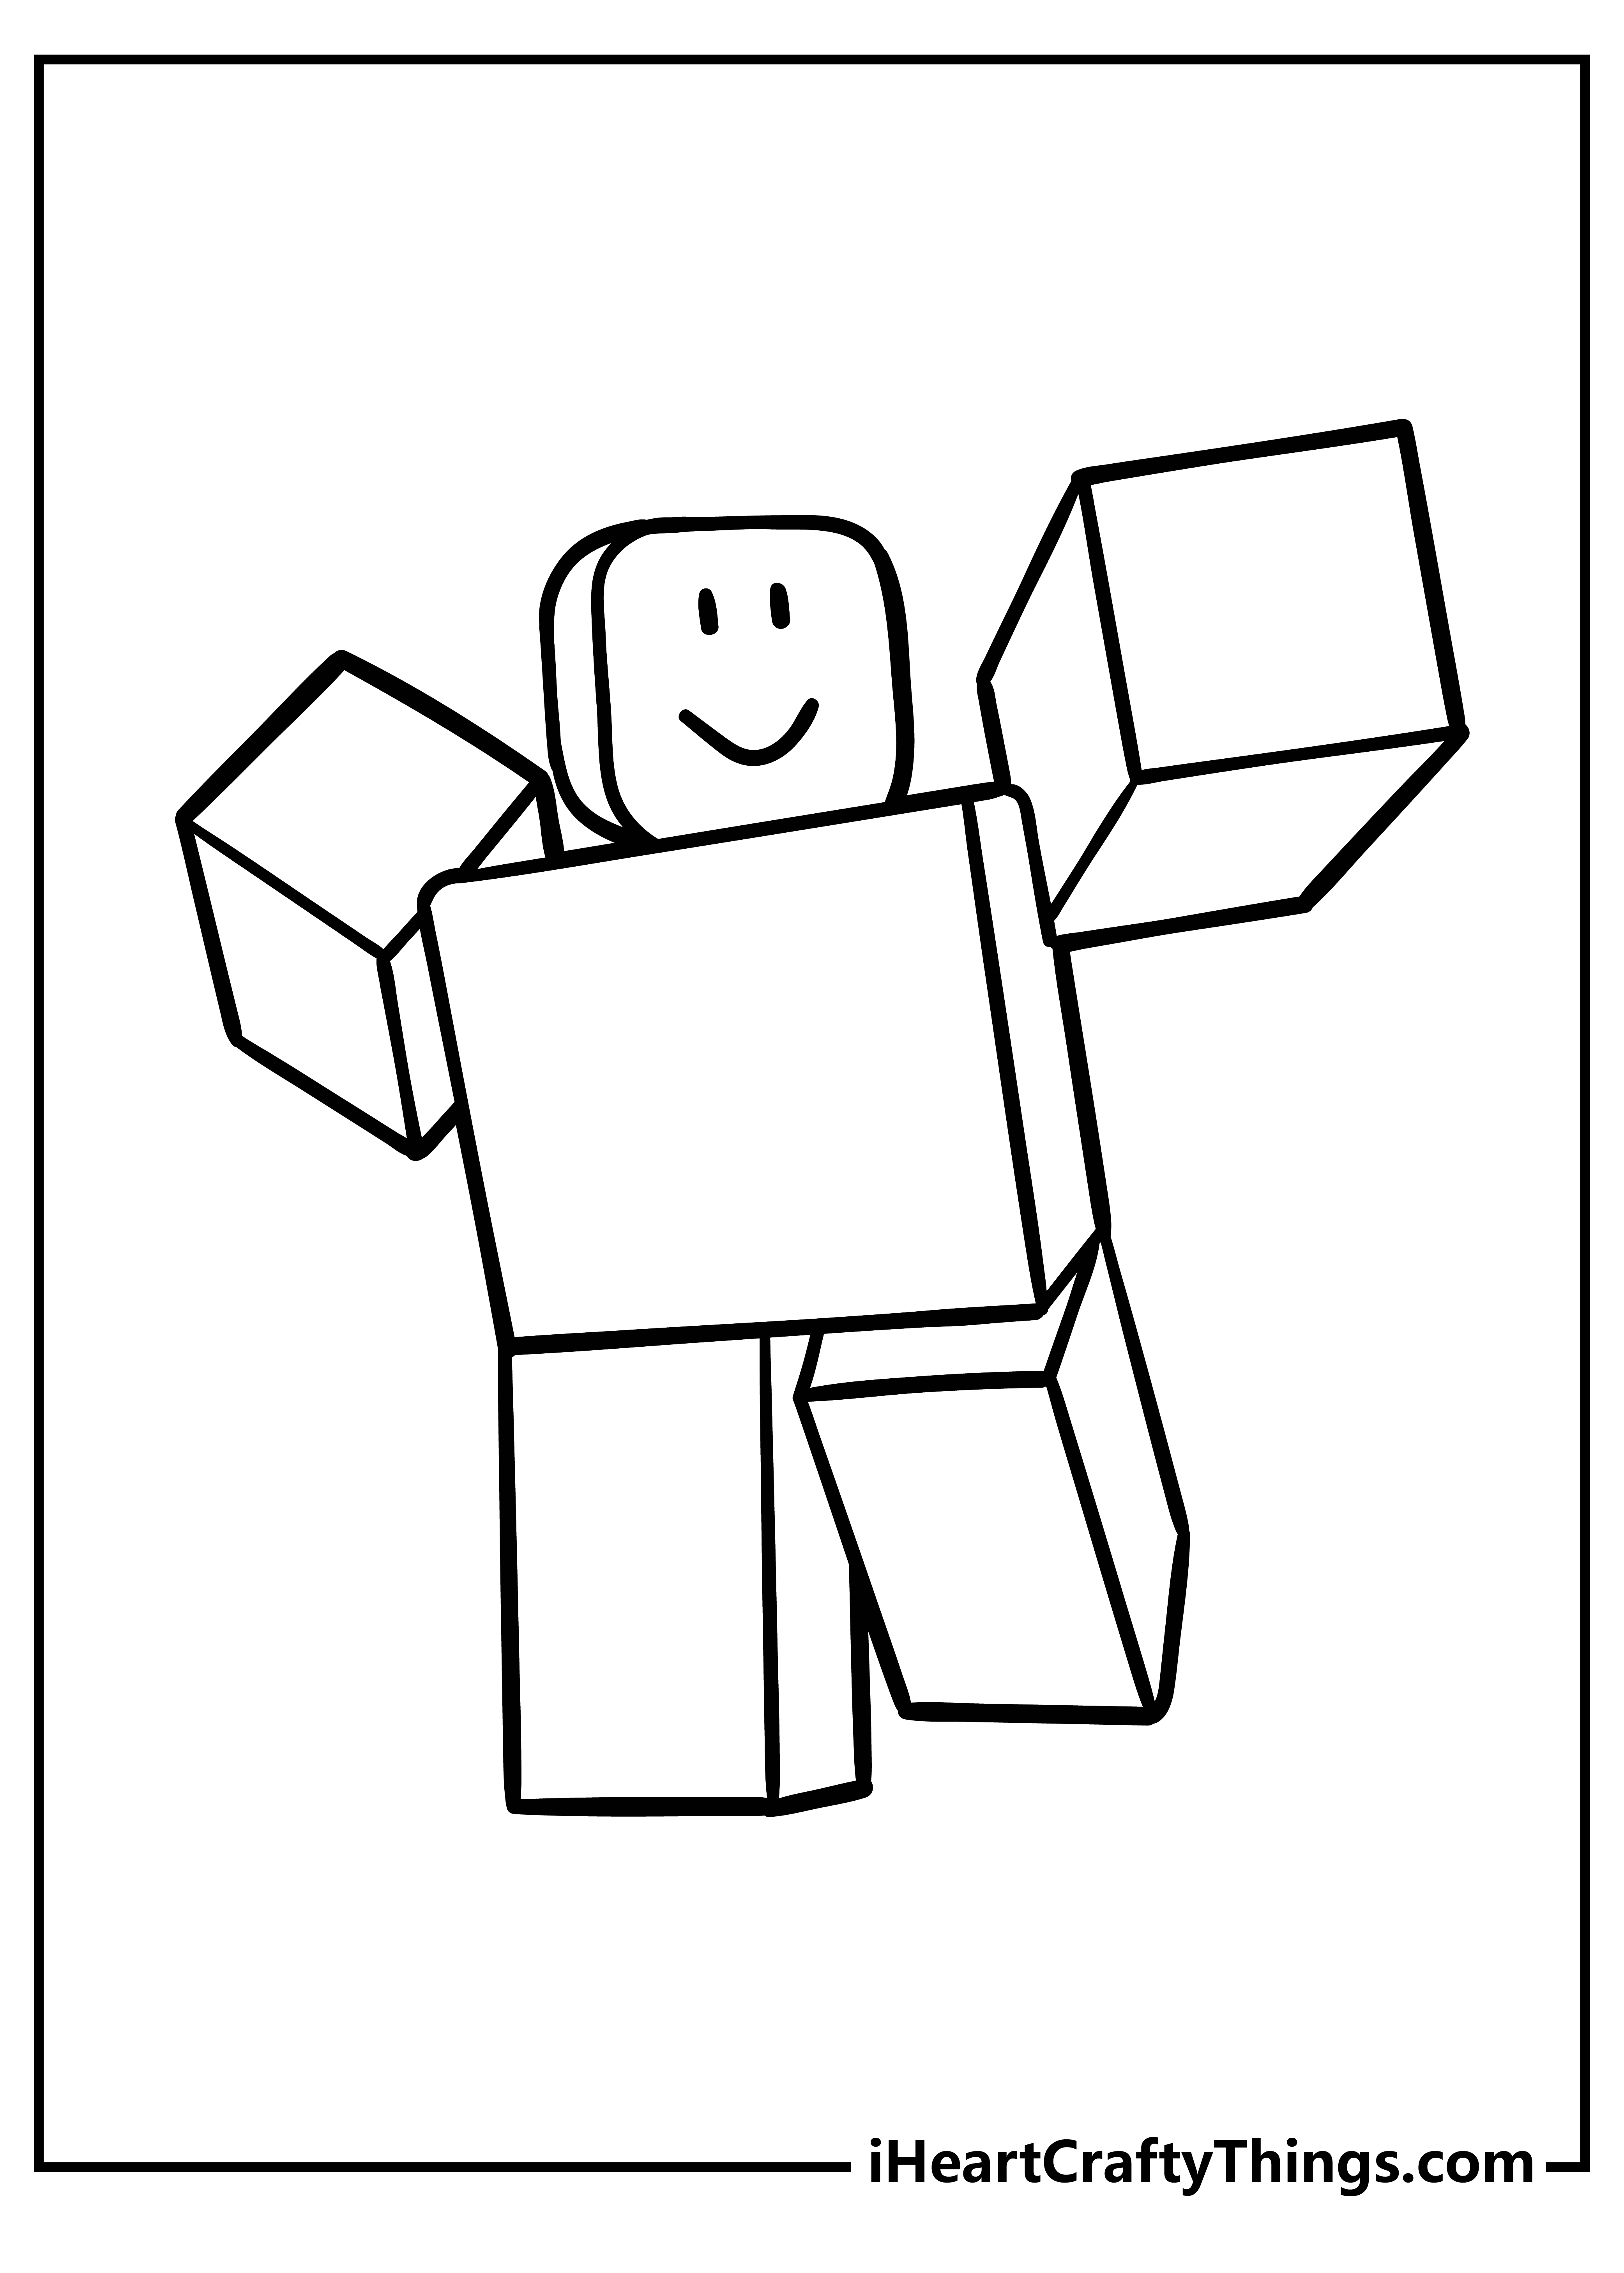 Roblox Coloring Pages | Coloring pages, Cute coloring pages, Create your  character